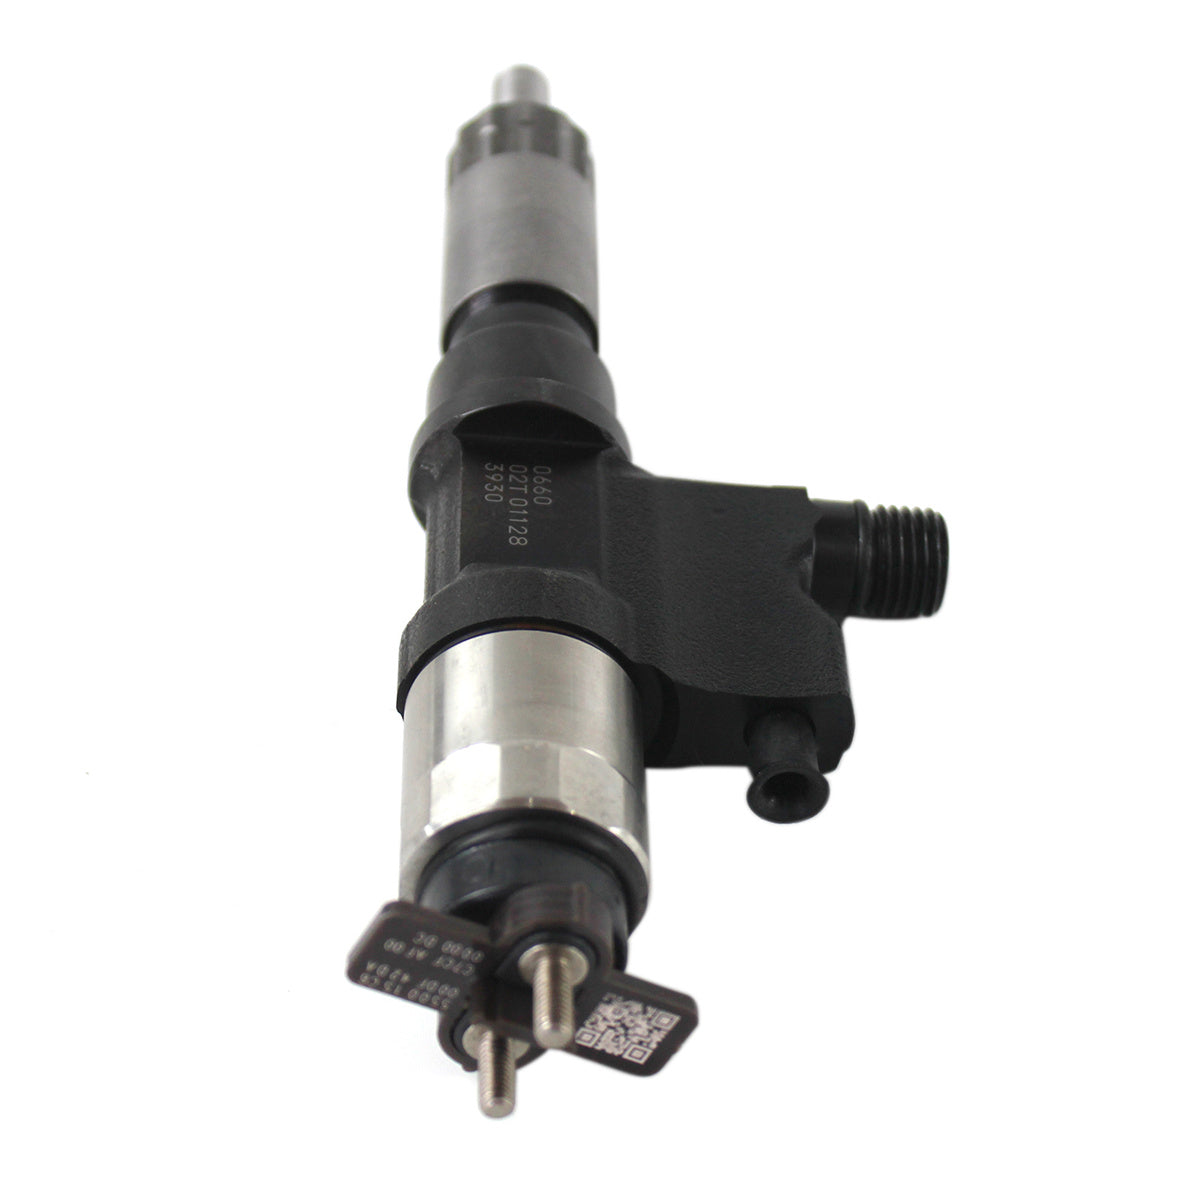 1-15300436-0 095000-6300 Fuel Injector for Hitachi 6WG1 - Sincomp